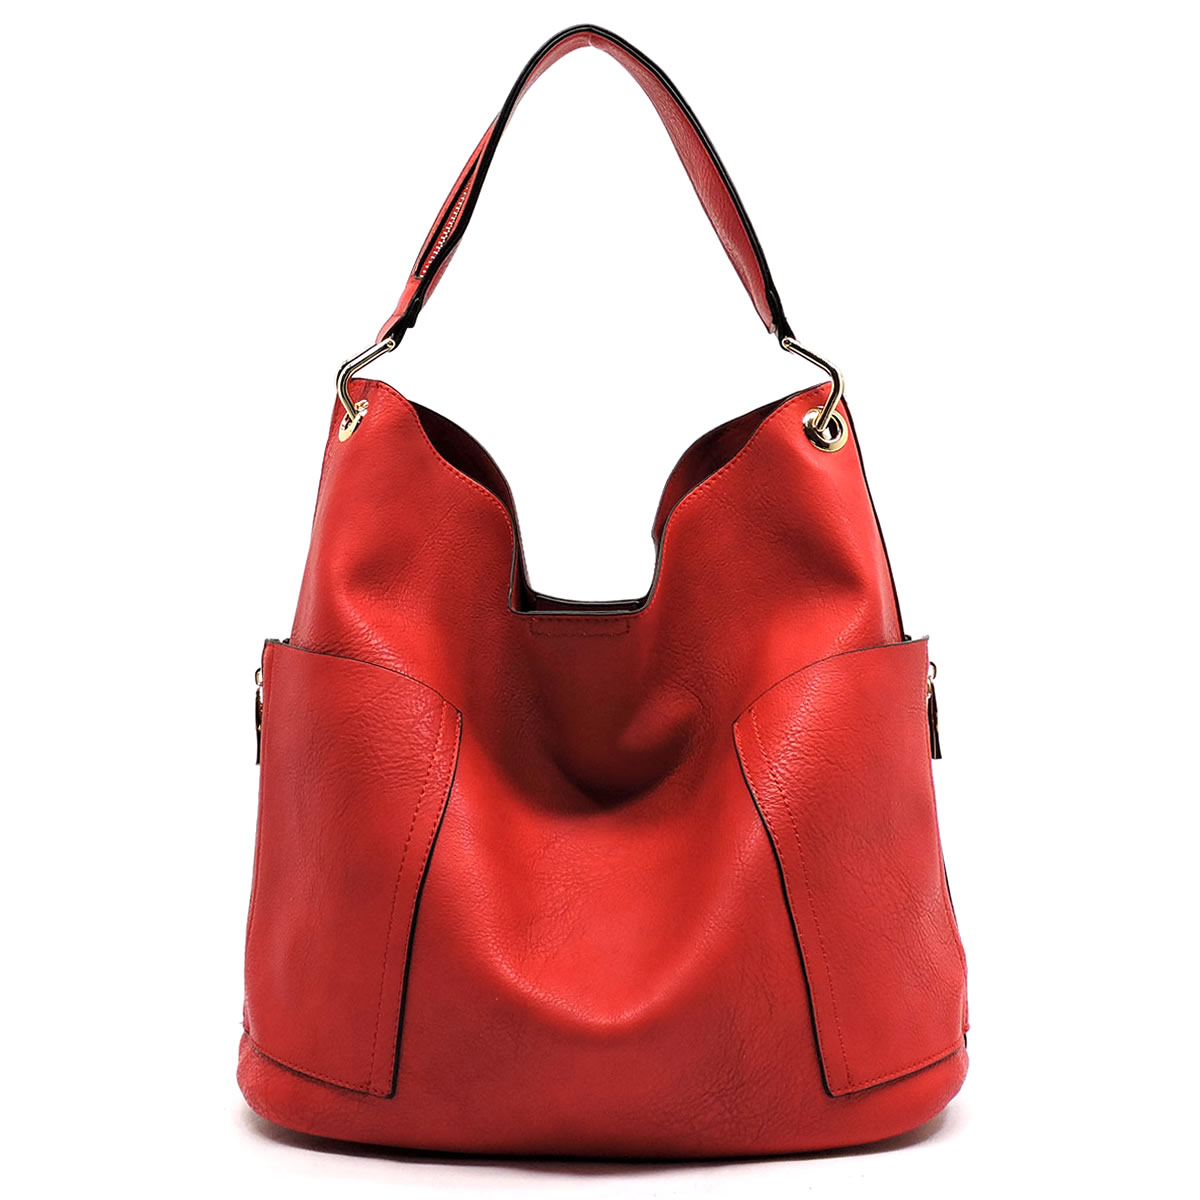 Expressions Jewelry & Accessories » Blog Archive » Red bag in bag hobo